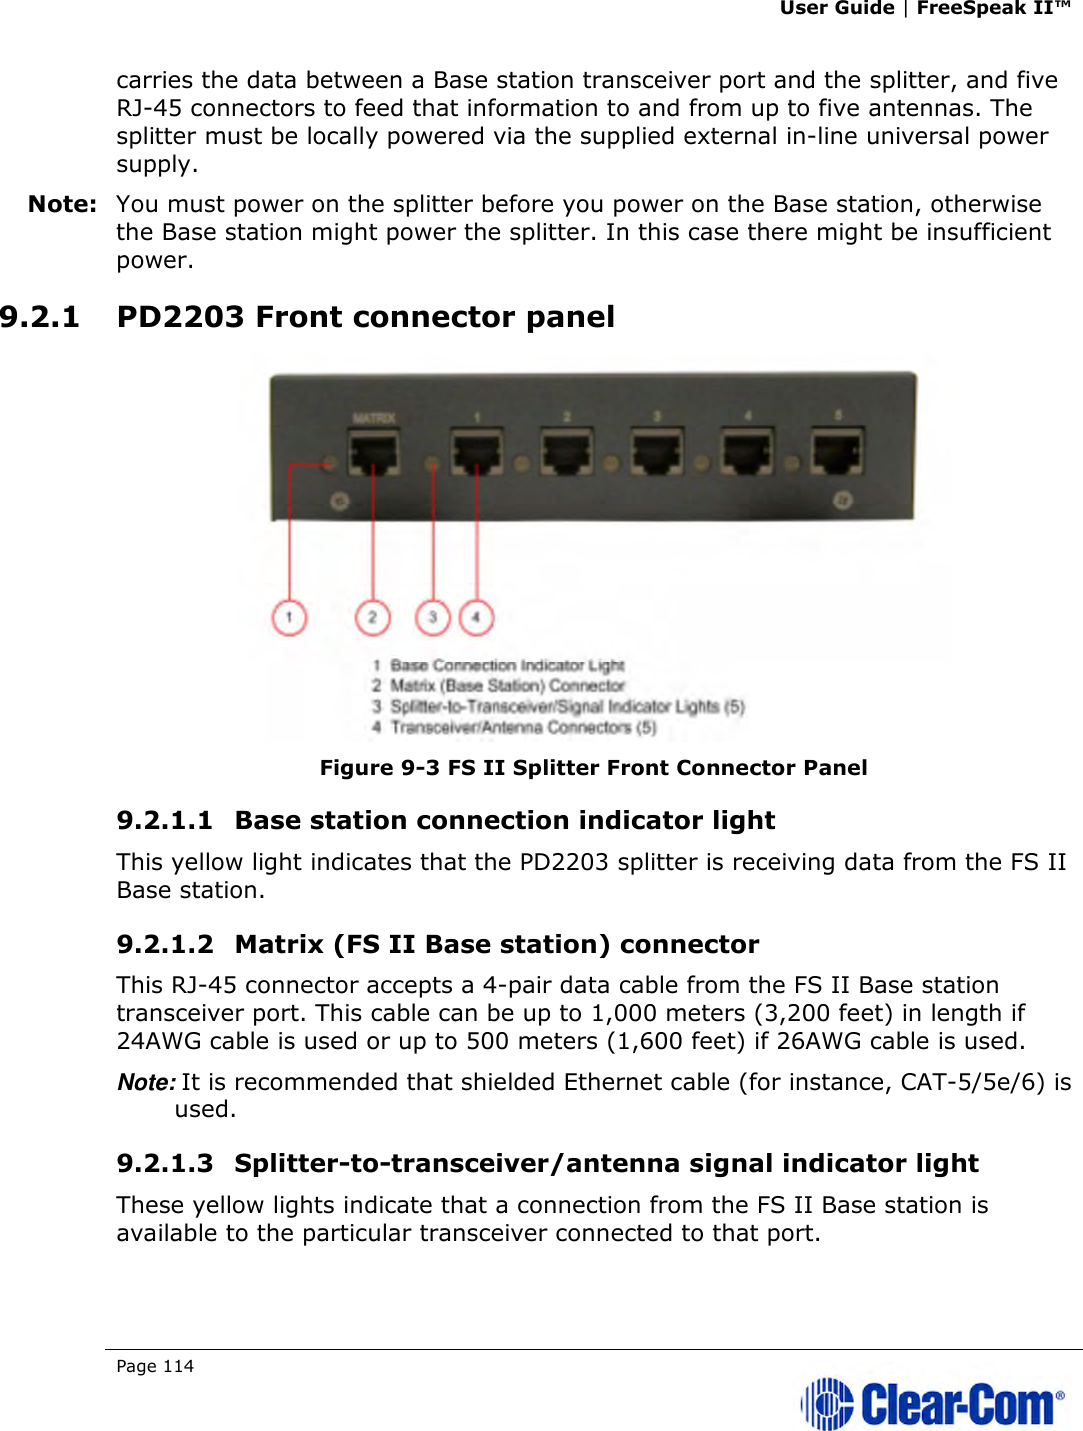 User Guide | FreeSpeak II™  Page 114   carries the data between a Base station transceiver port and the splitter, and five RJ-45 connectors to feed that information to and from up to five antennas. The splitter must be locally powered via the supplied external in-line universal power supply. Note: You must power on the splitter before you power on the Base station, otherwise the Base station might power the splitter. In this case there might be insufficient power. 9.2.1 PD2203 Front connector panel  Figure 9-3 FS II Splitter Front Connector Panel 9.2.1.1 Base station connection indicator light  This yellow light indicates that the PD2203 splitter is receiving data from the FS II Base station. 9.2.1.2 Matrix (FS II Base station) connector  This RJ-45 connector accepts a 4-pair data cable from the FS II Base station transceiver port. This cable can be up to 1,000 meters (3,200 feet) in length if 24AWG cable is used or up to 500 meters (1,600 feet) if 26AWG cable is used. Note: It is recommended that shielded Ethernet cable (for instance, CAT-5/5e/6) is used. 9.2.1.3 Splitter-to-transceiver/antenna signal indicator light  These yellow lights indicate that a connection from the FS II Base station is available to the particular transceiver connected to that port. 